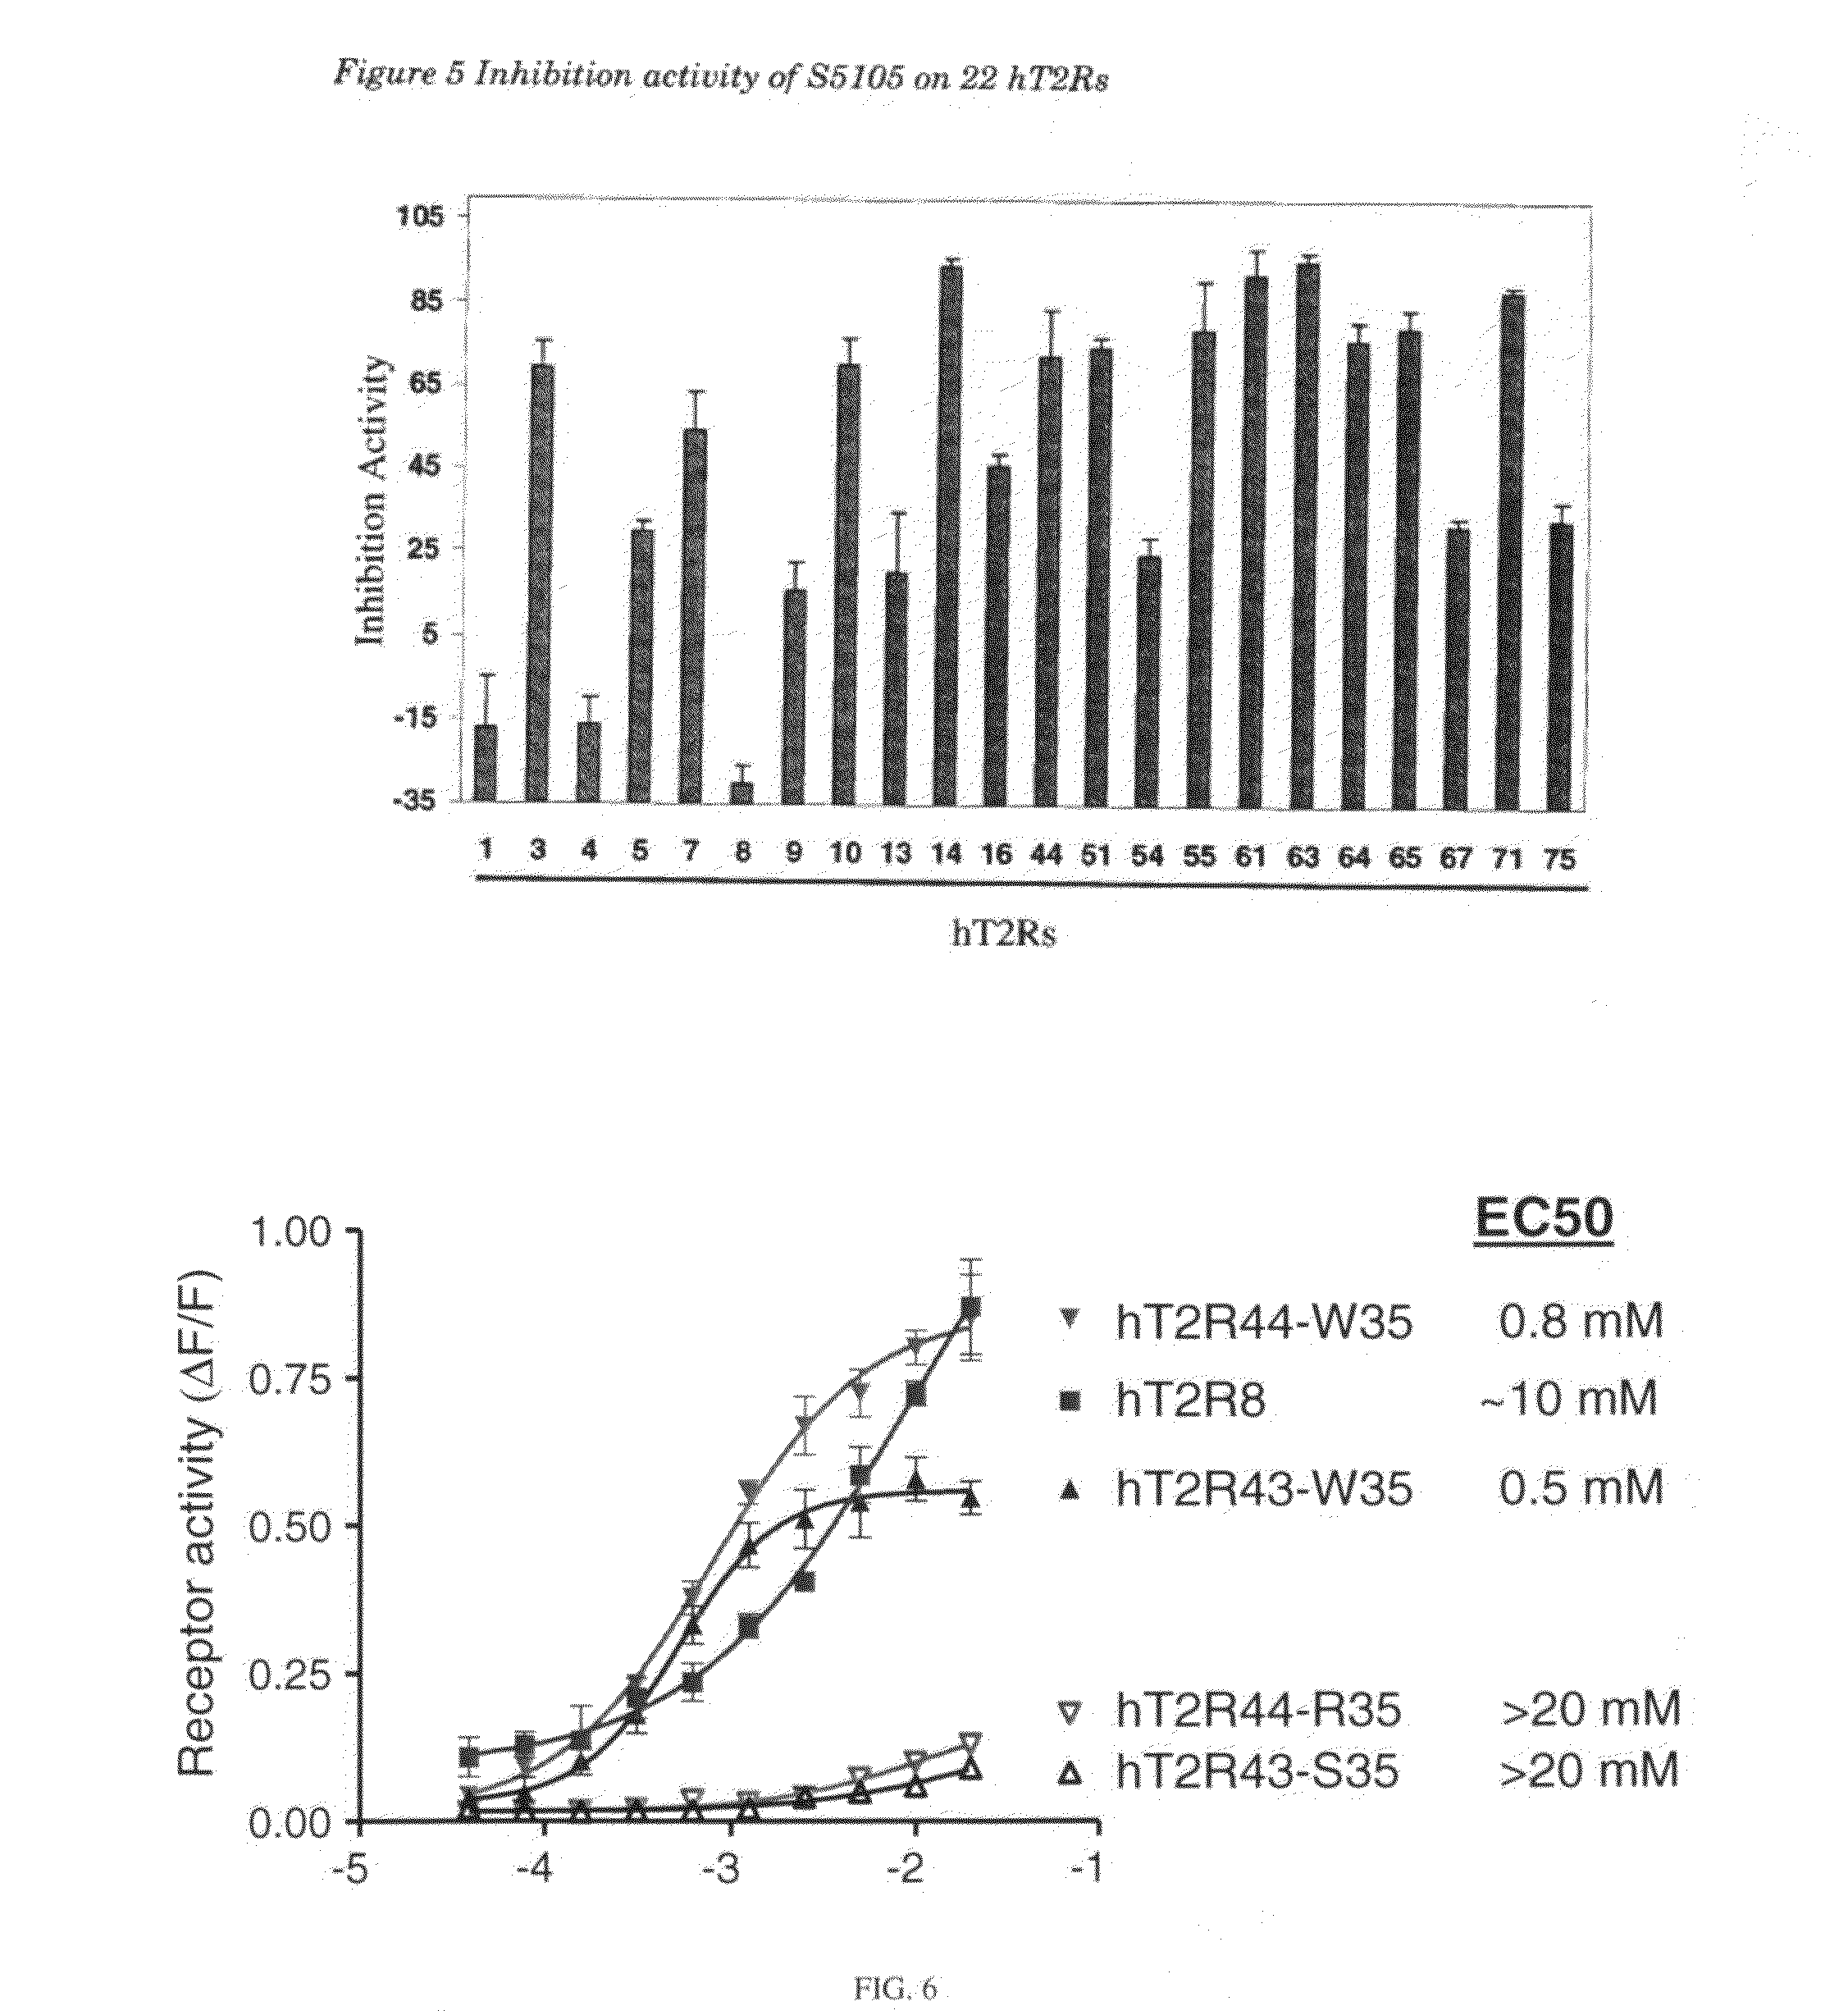 Identification of human T2R receptors that respond to bitter compounds that elicit the bitter taste in compositions, and the use thereof in assays to identify compounds that inhibit (block) bitter taste in compositions and use thereof